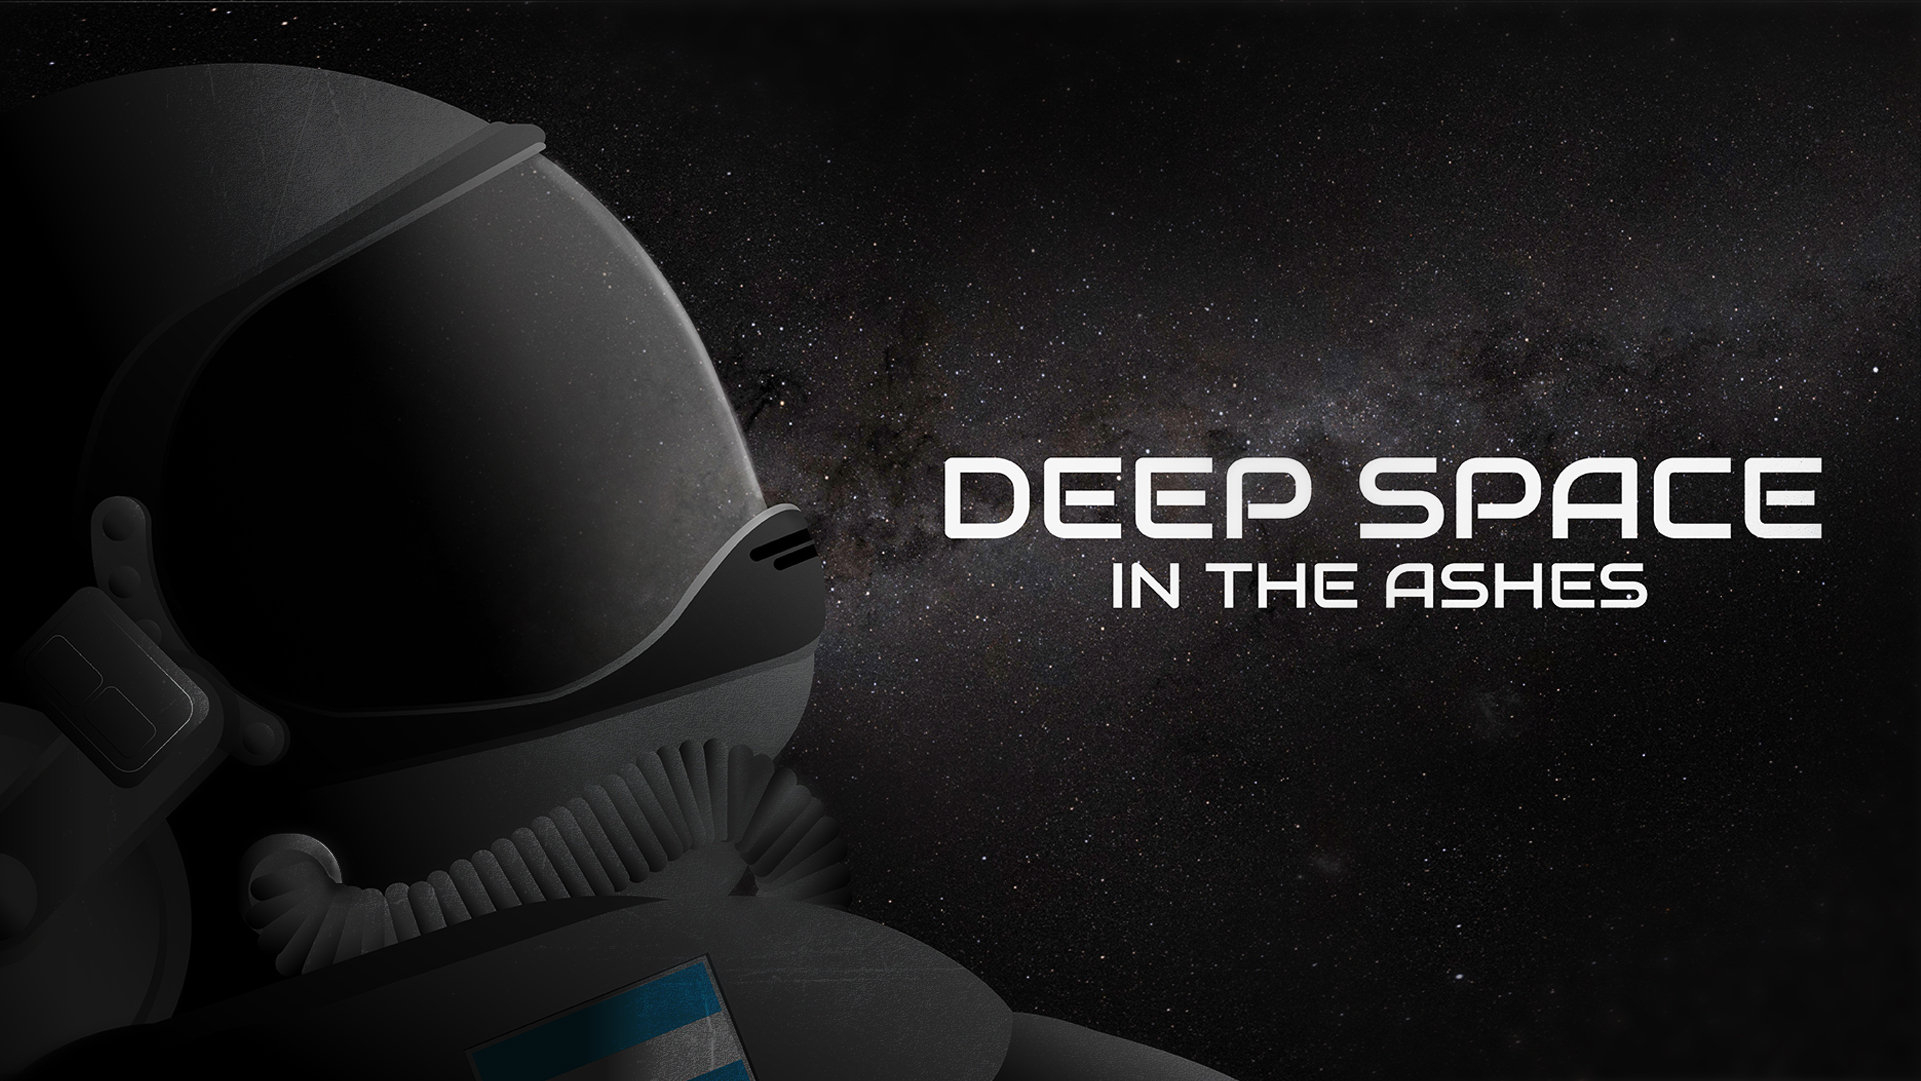 DeepSpace - In the Ashes